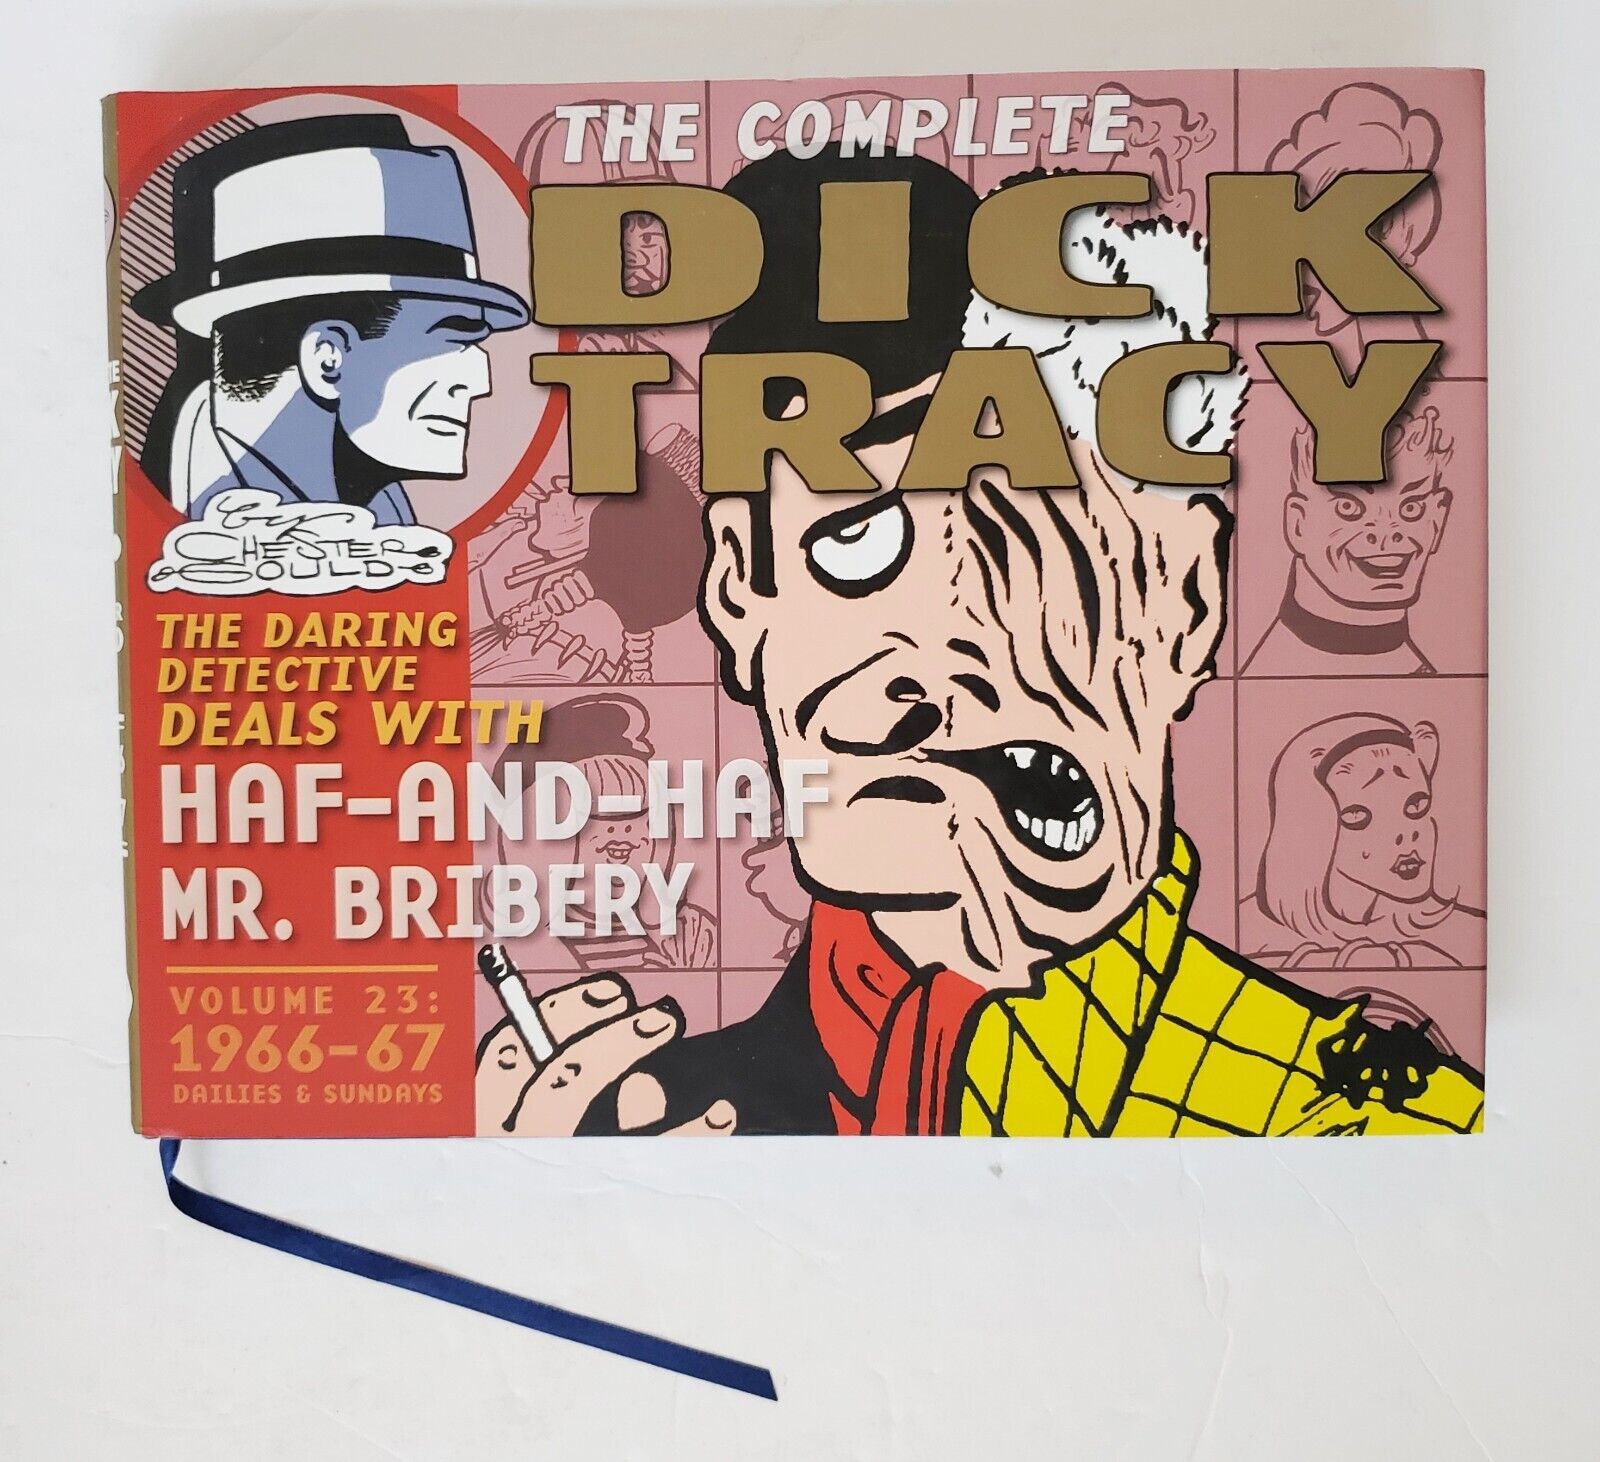 The Complete Dick Tracy Volume 23 1966-67 HCDJ 1st Print Chester Gould IDW 2017